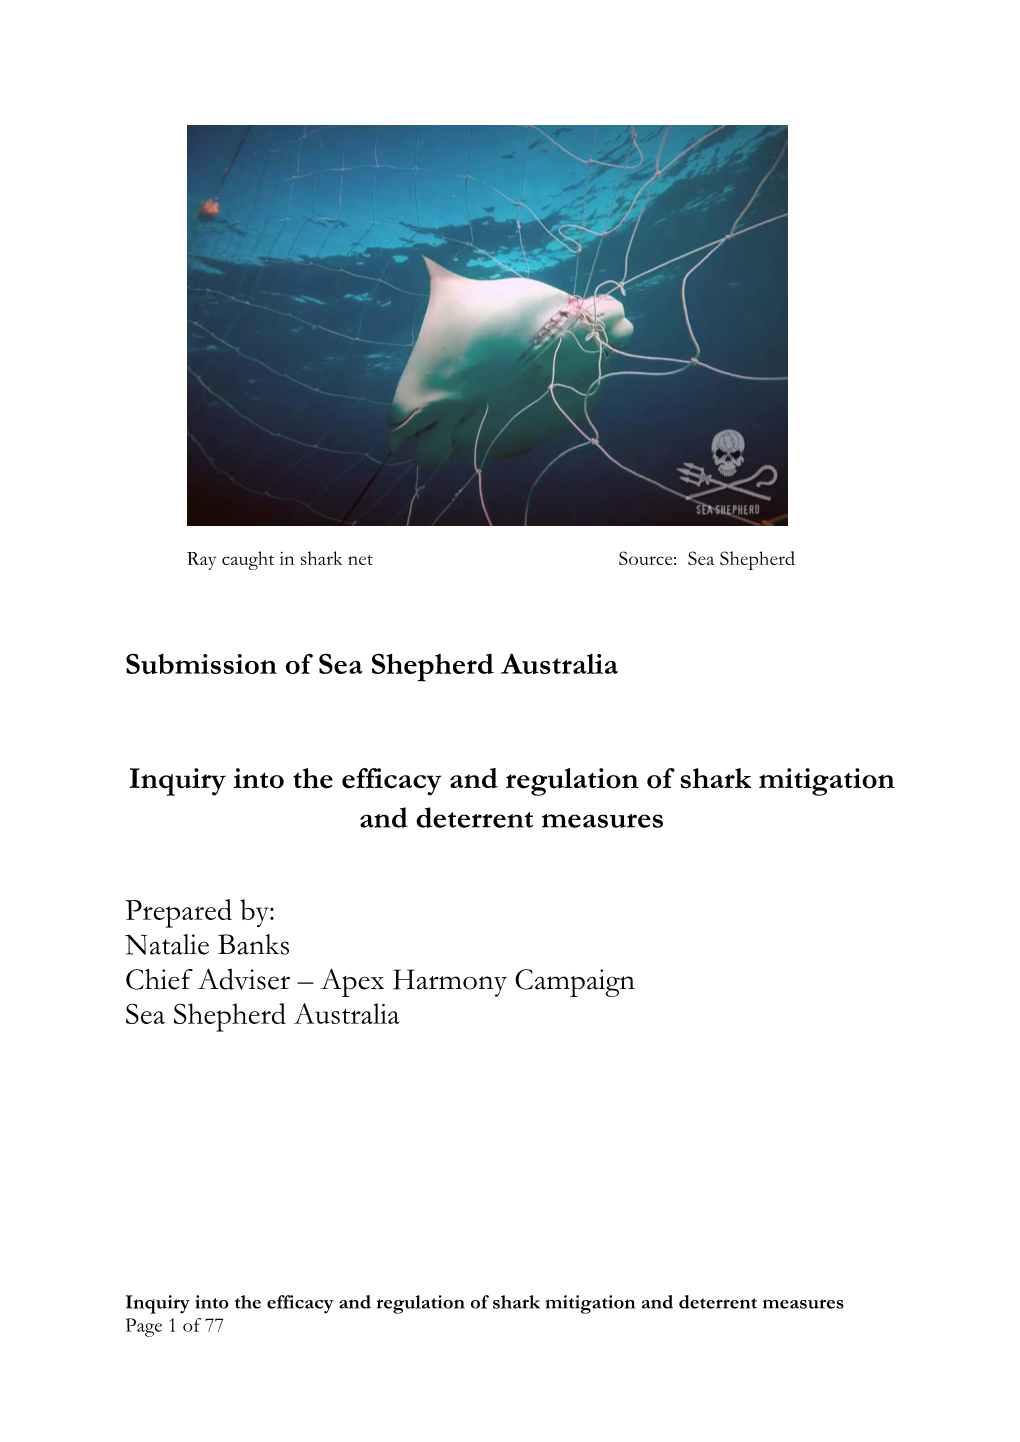 Submission of Sea Shepherd Australia Inquiry Into the Efficacy